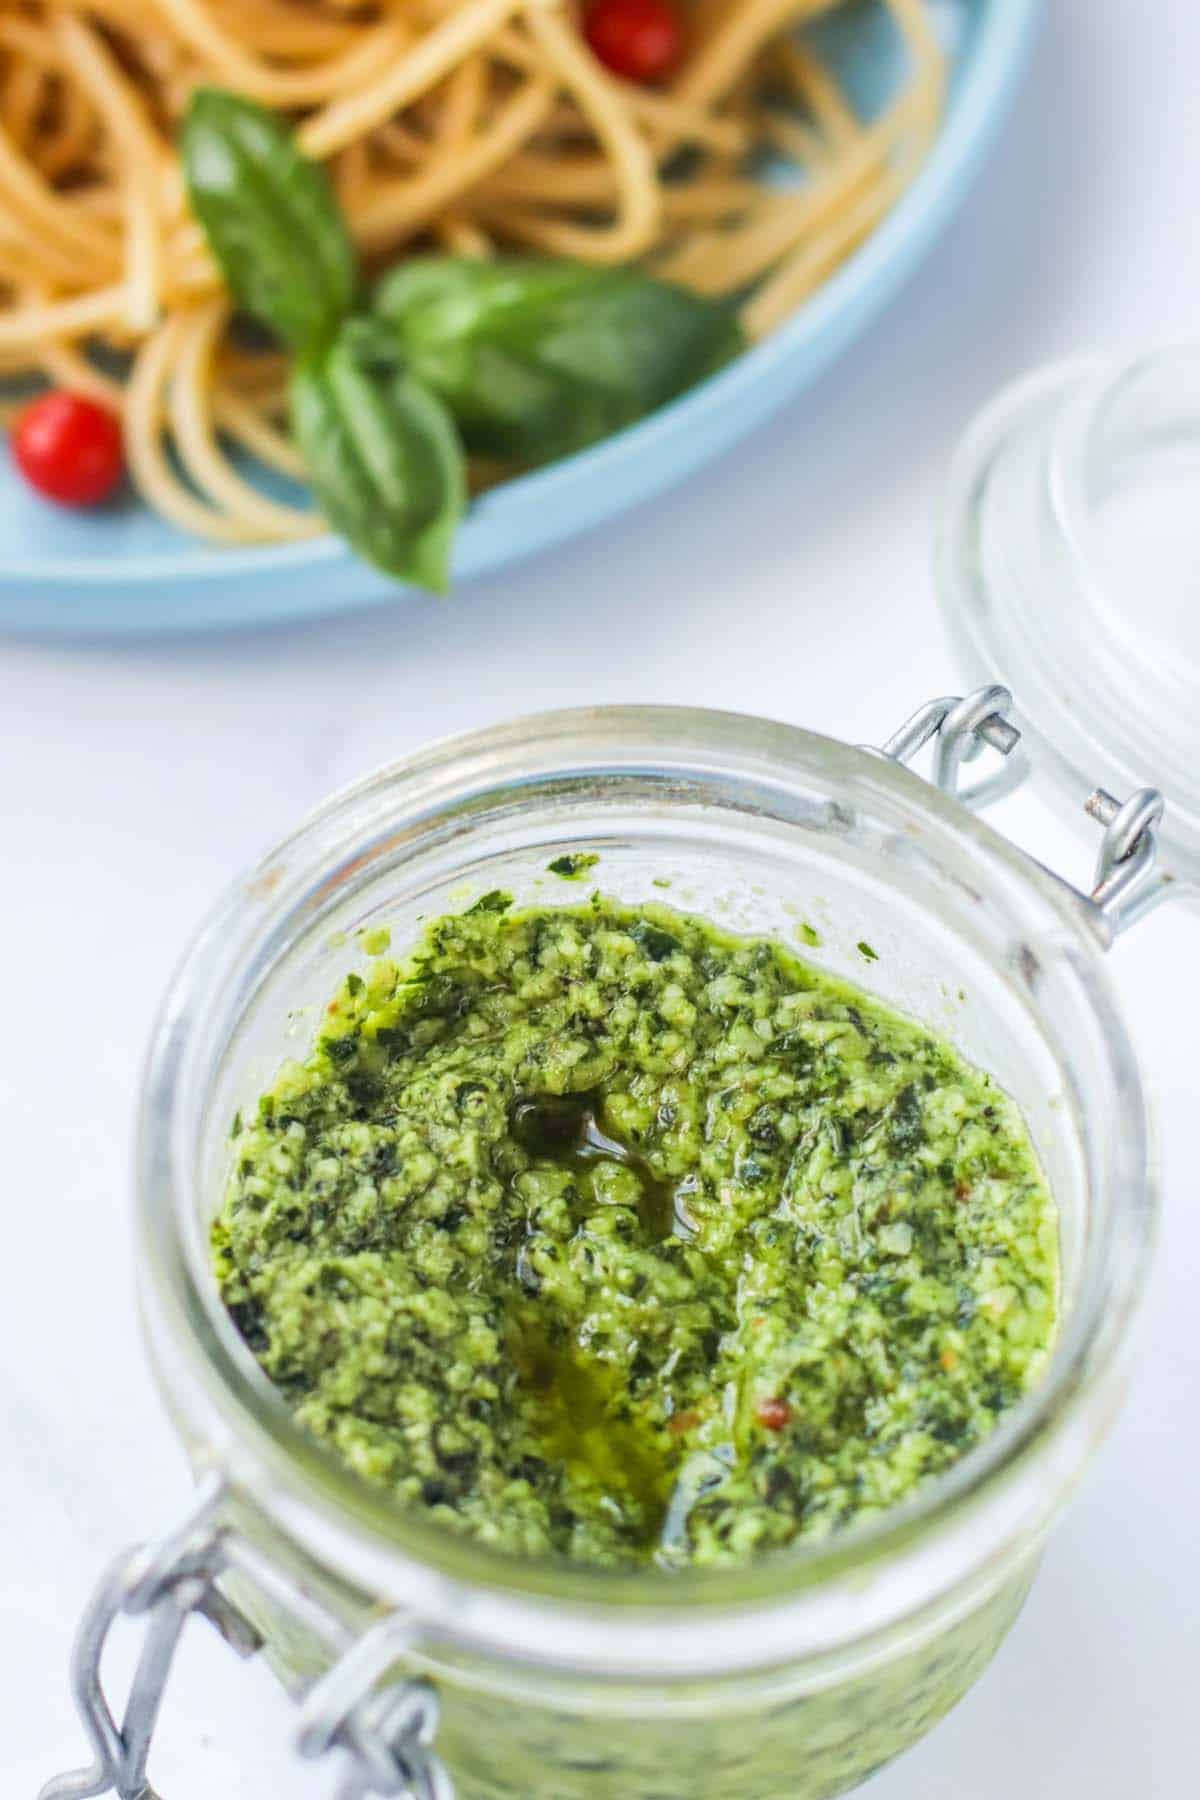 Pesto in a container in front of a plate of spaghetti.